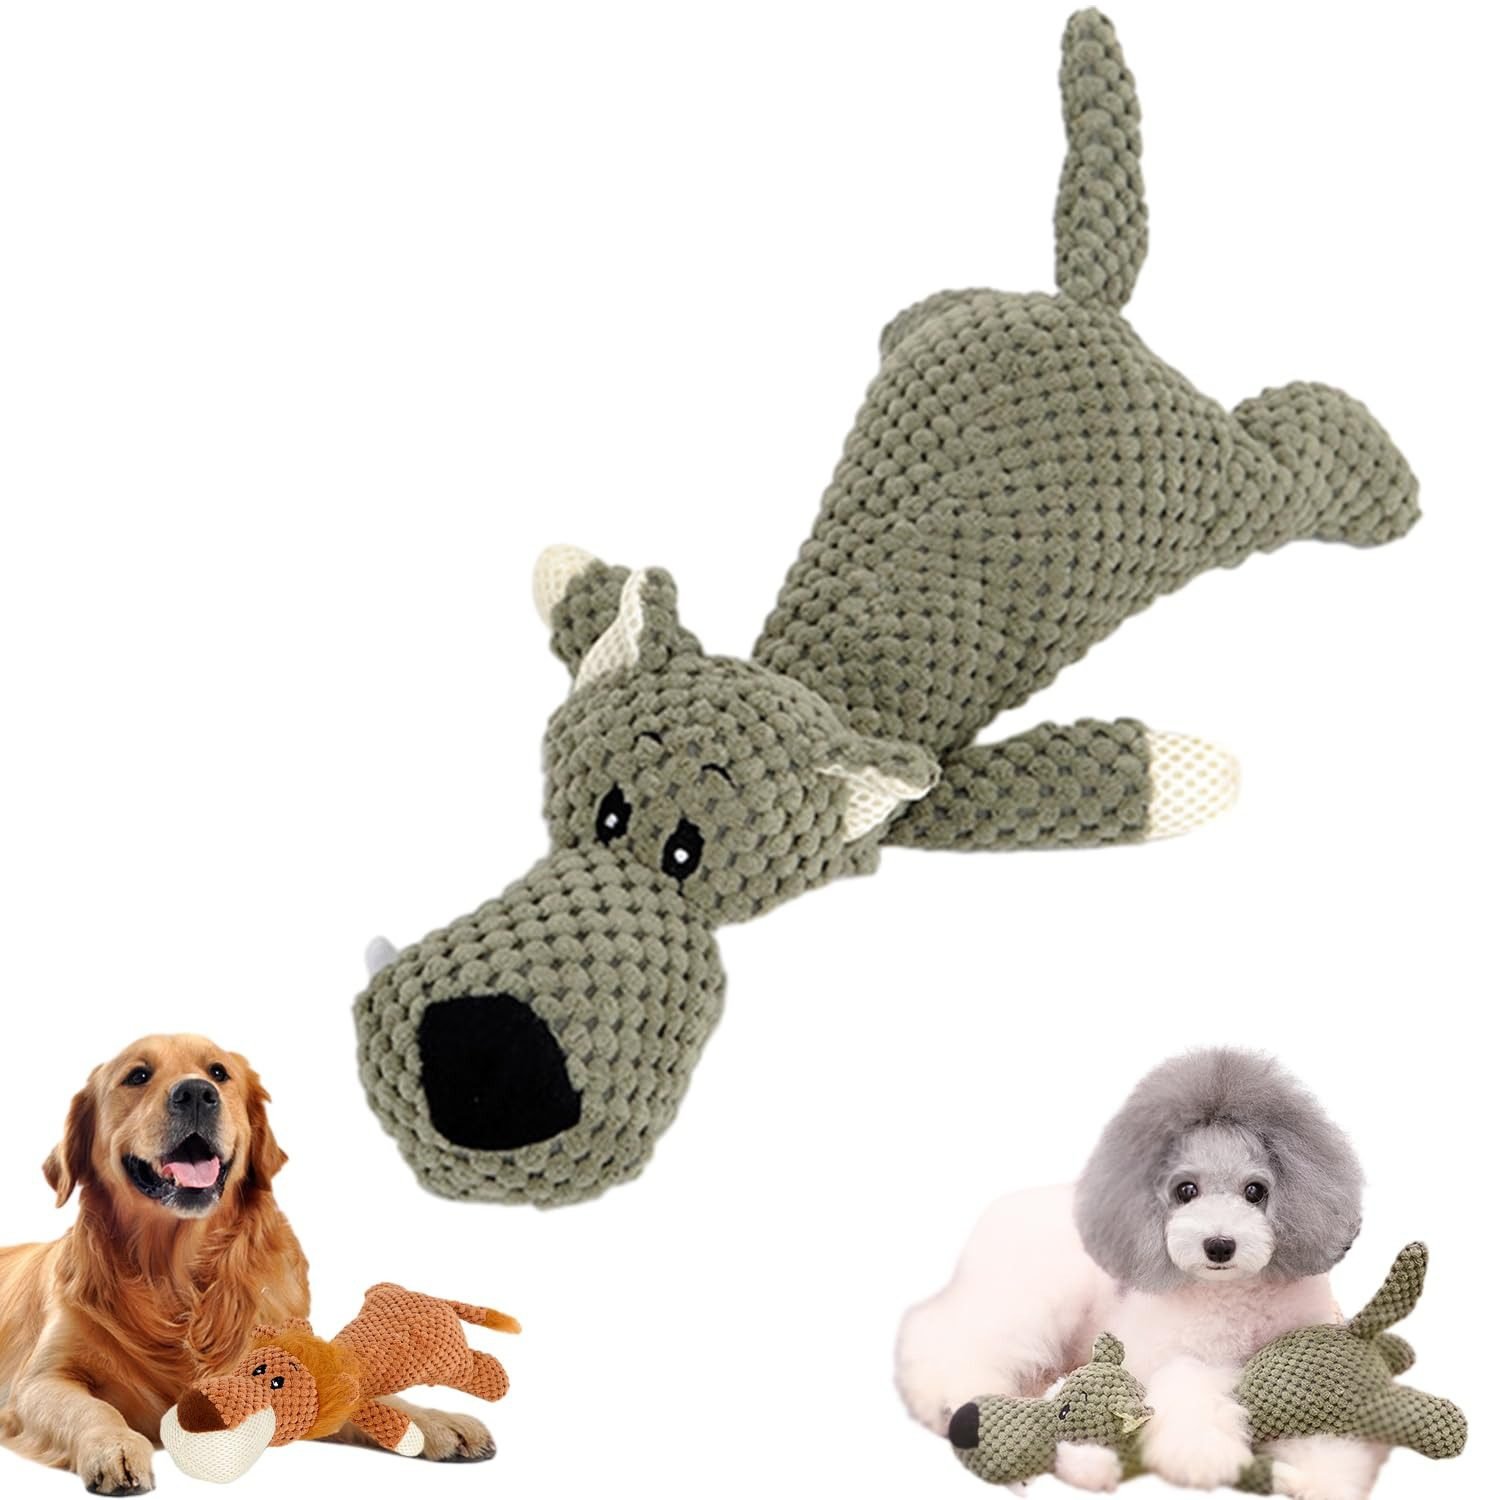 the importance of choosing the right antarcking dog toys